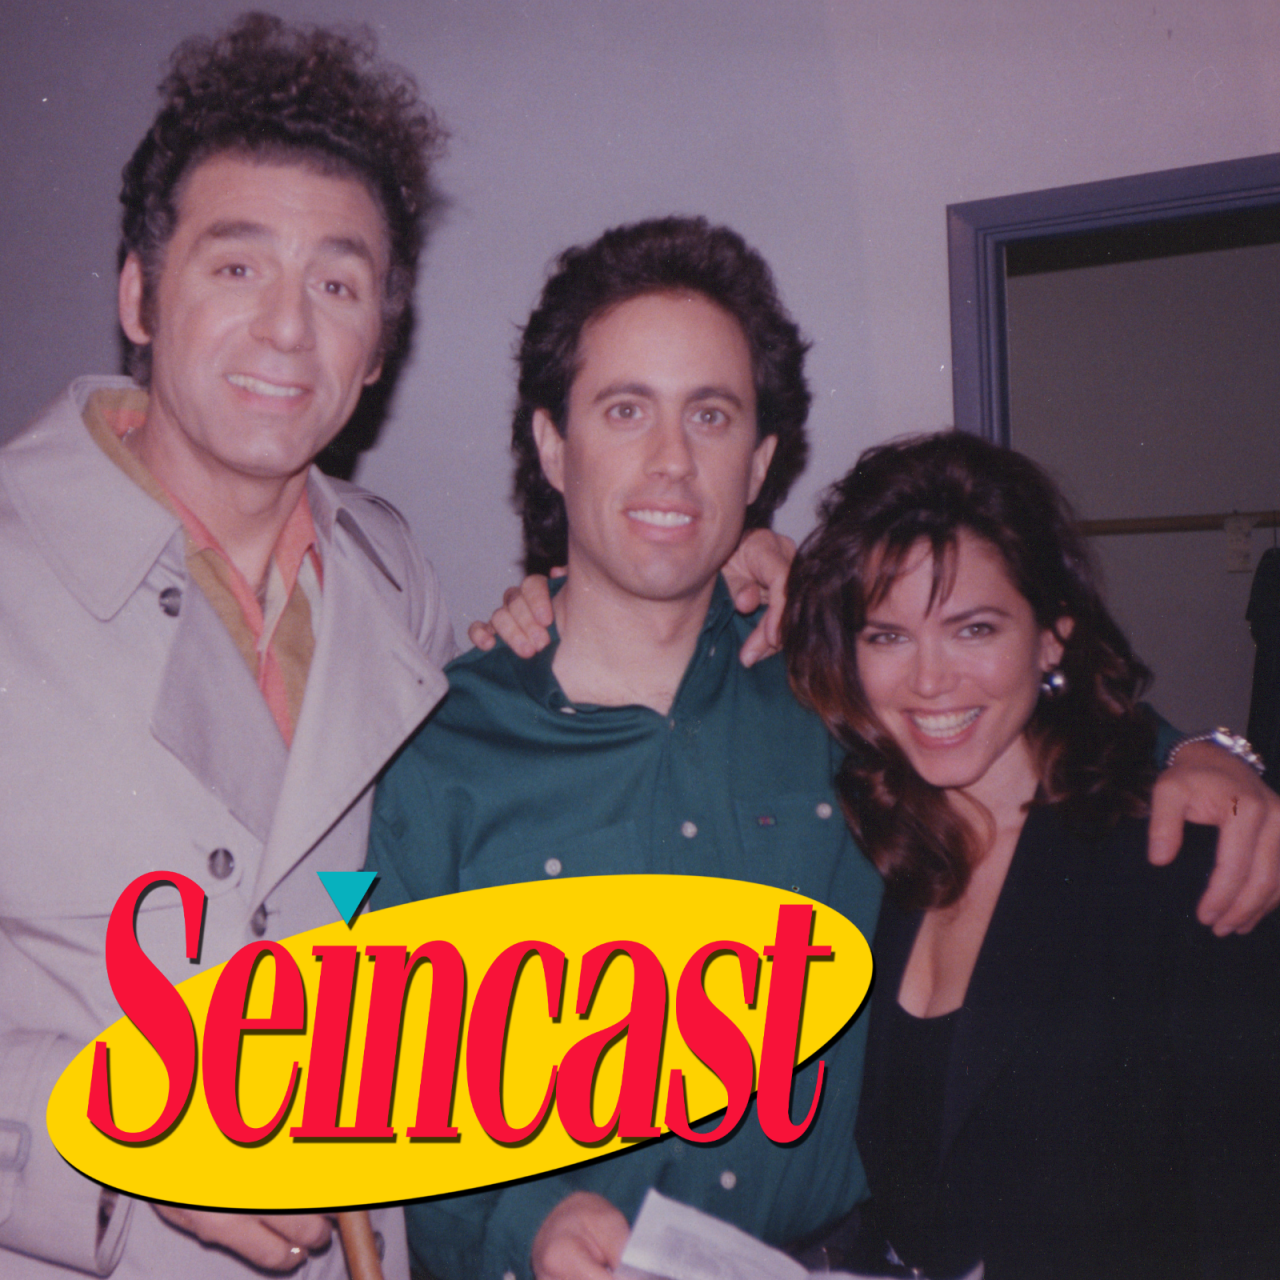 SEINCAST: A Seinfeld Podcast — She was looking for the baby’s room, but found us...1280 x 1280